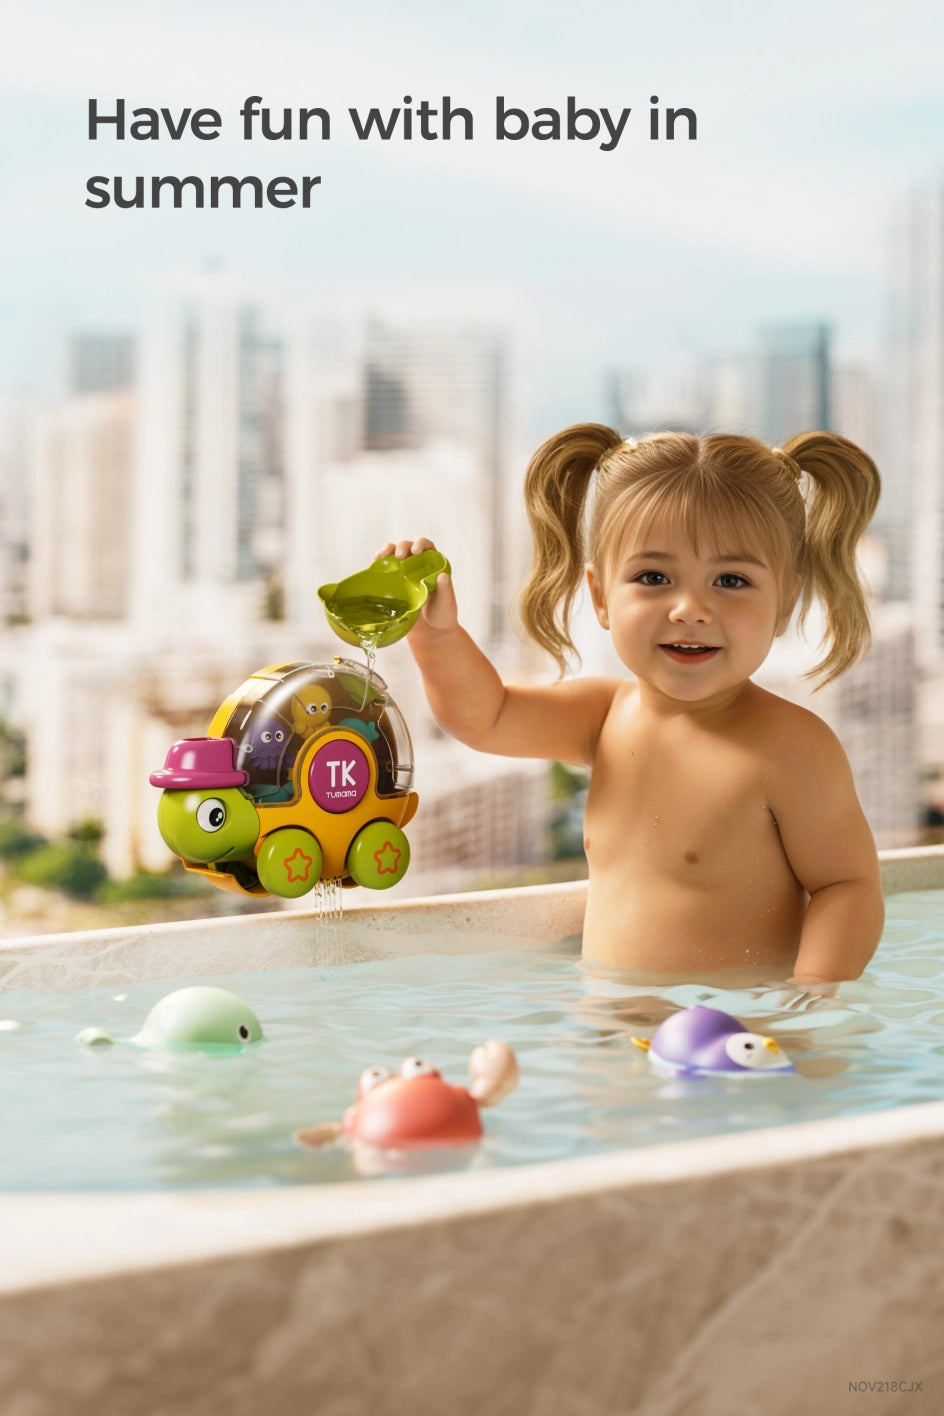 Bath toy with wind up feature for toddler bath fun